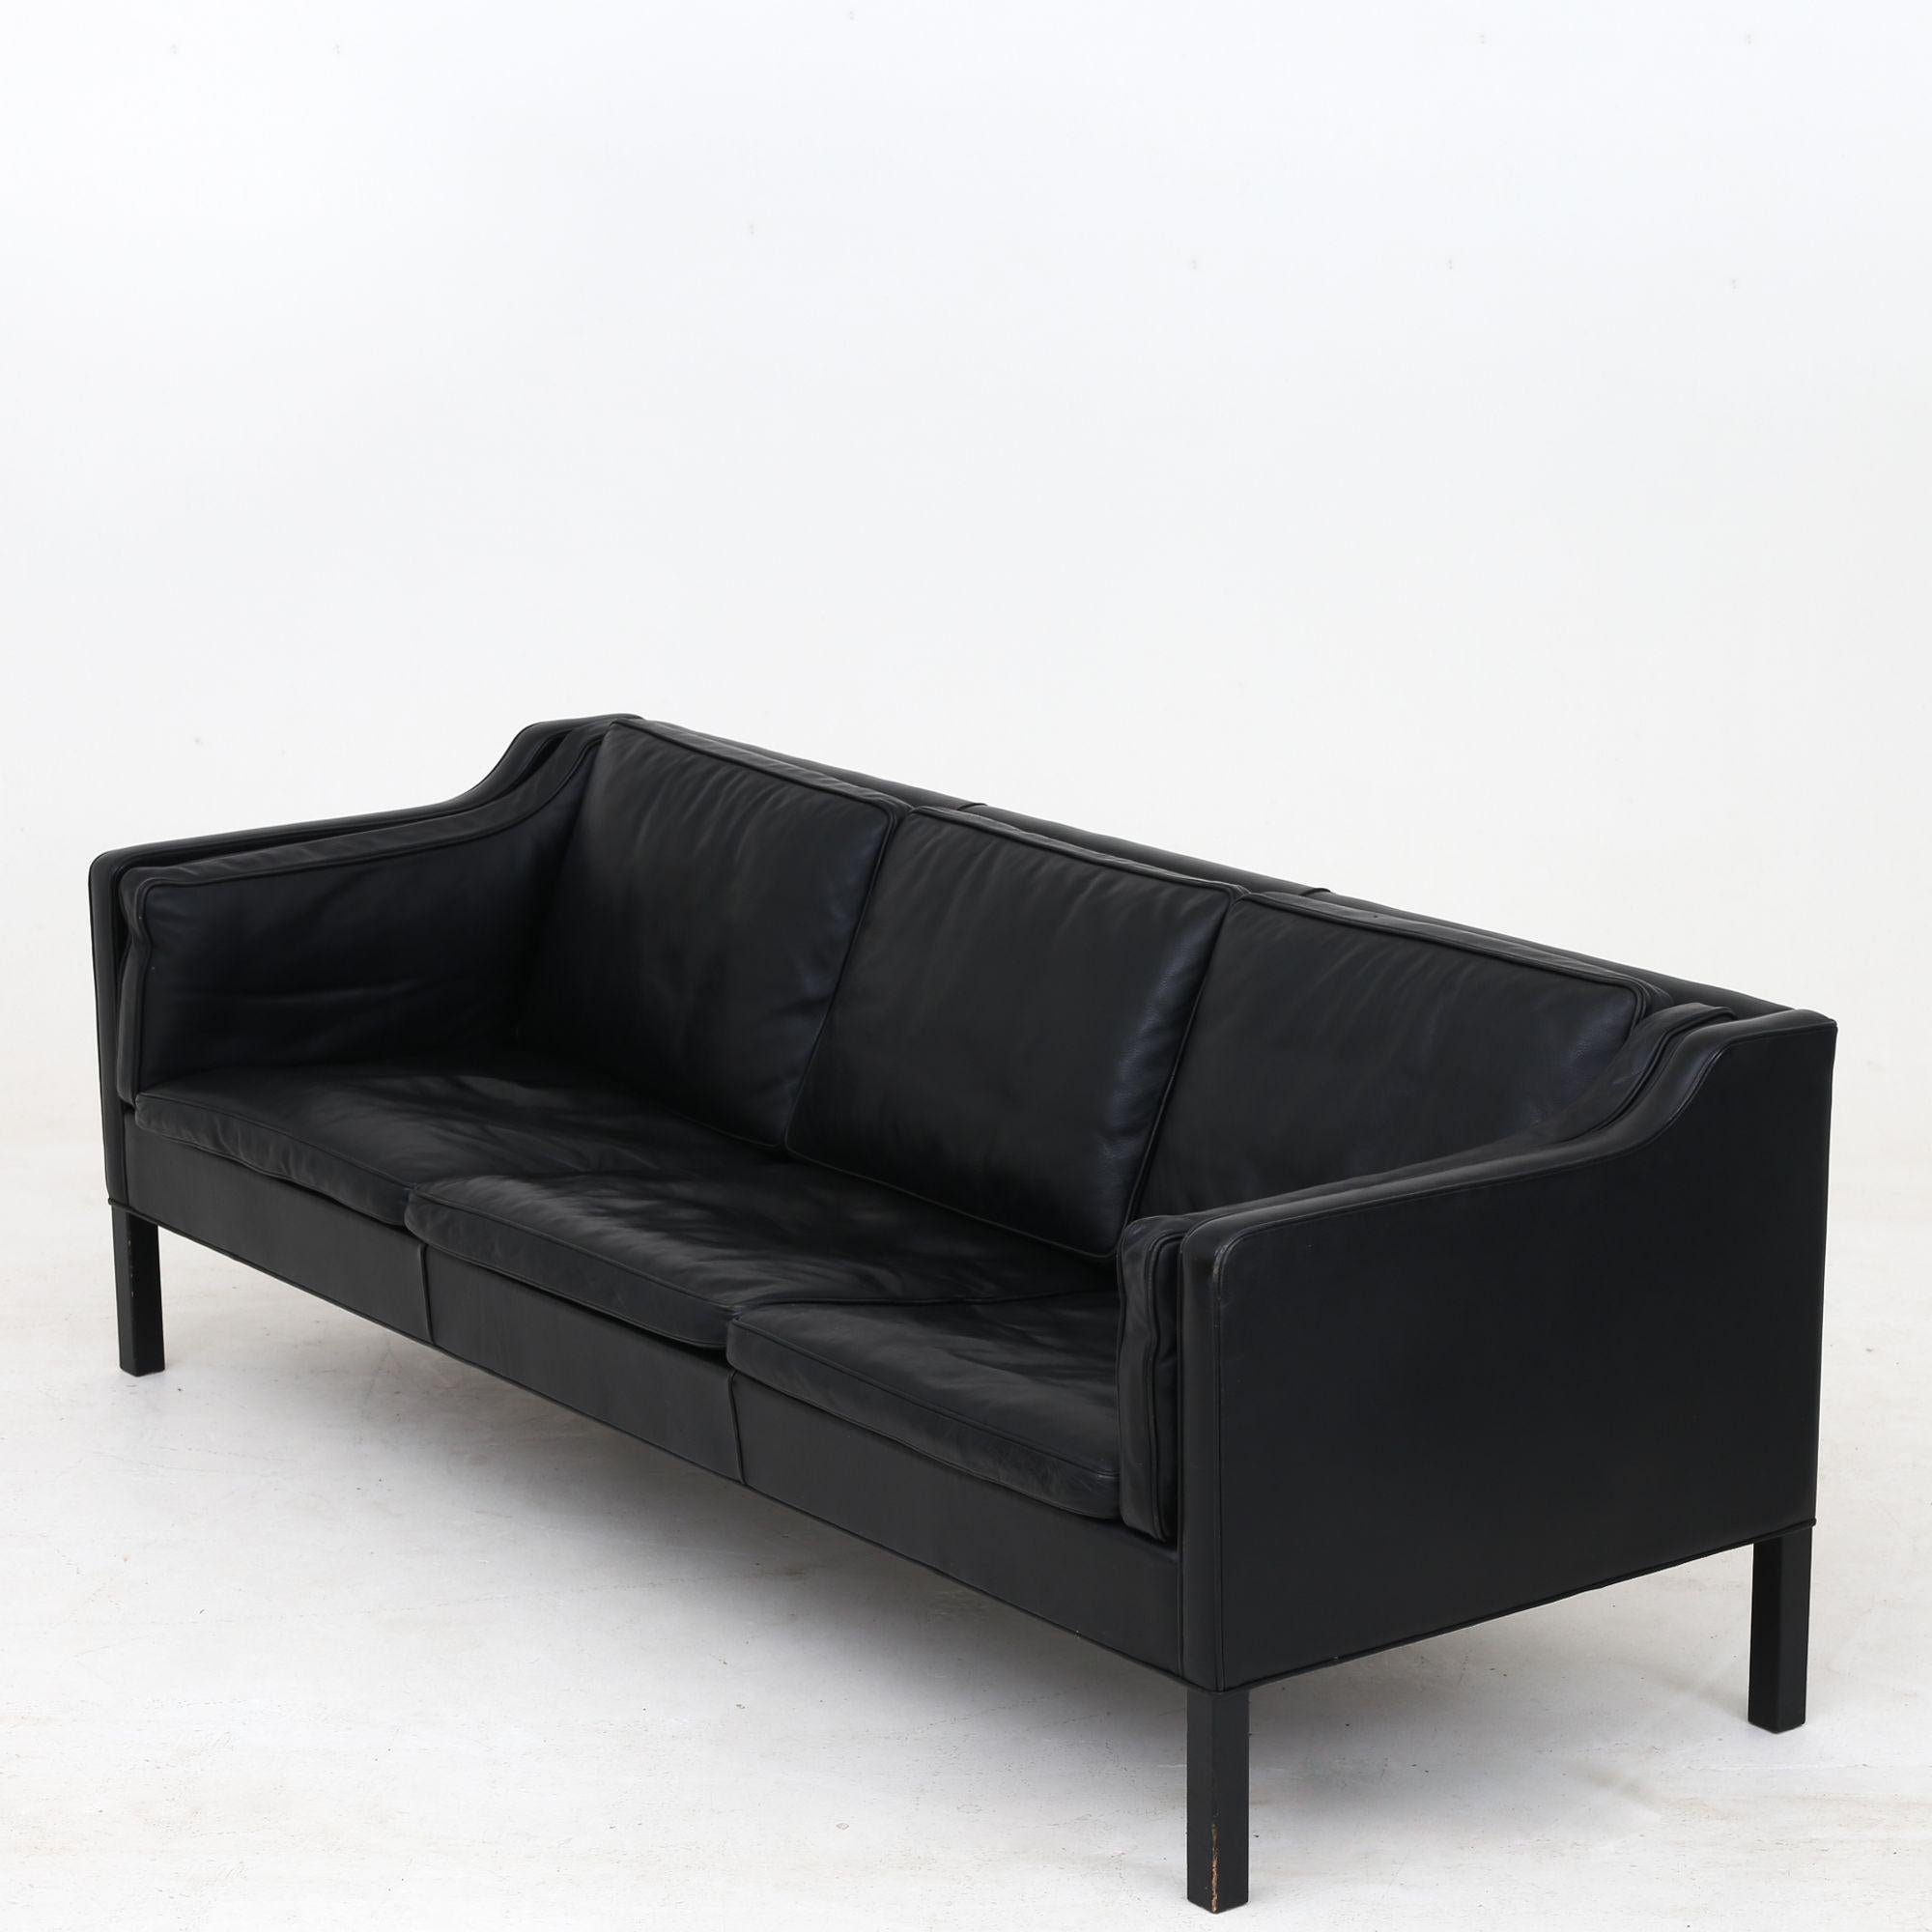 BM 2213 - 3-seater sofa in black leather with legs in black lacquered oak. Børge Mogensen / Fredericia Furniture.